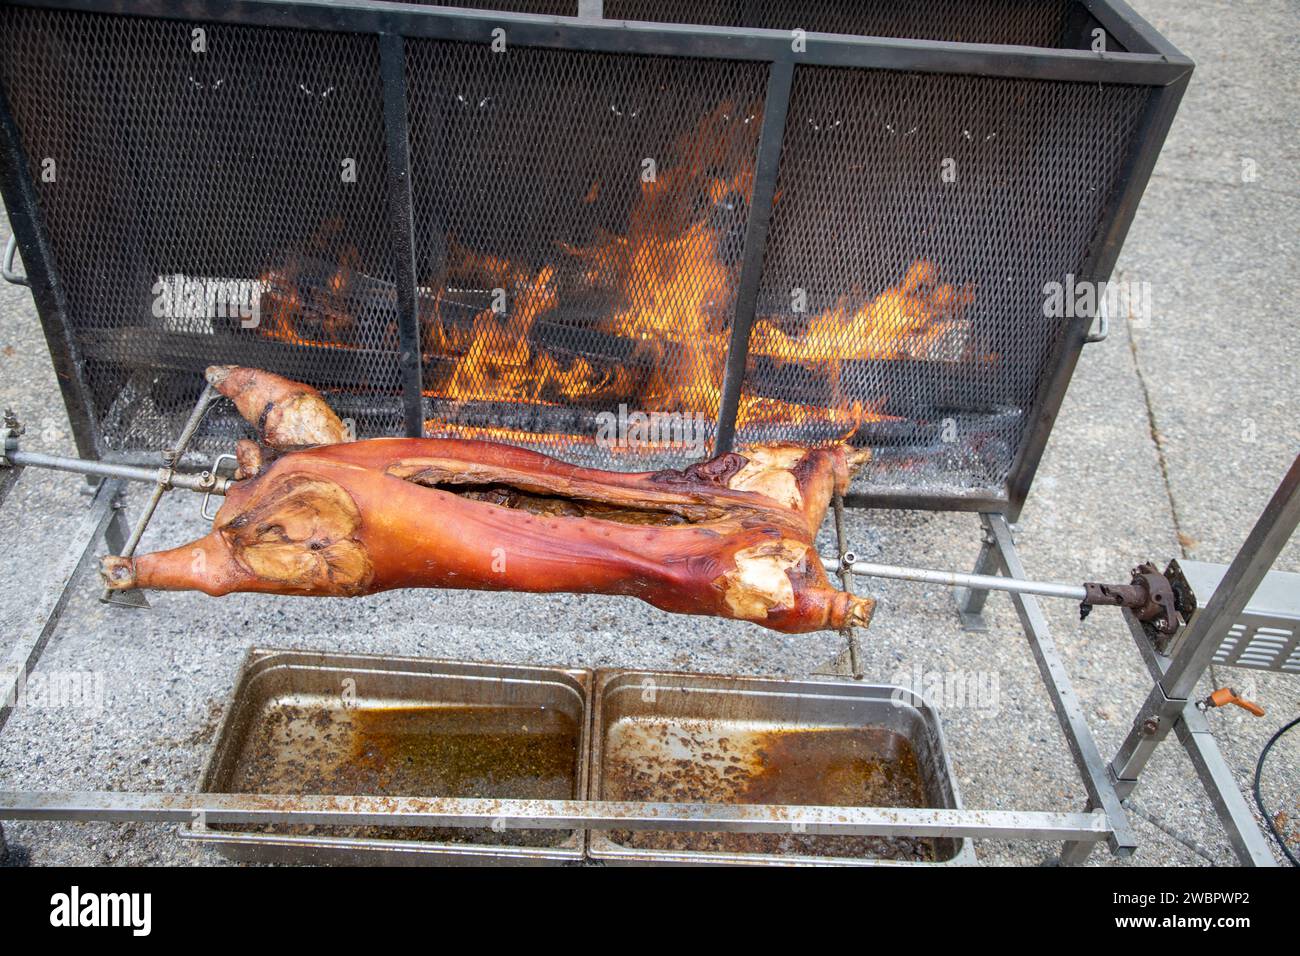 Pig on a spit piglet suckling fire roast grill barbecue bbq cook pork meat food meal dinner Stock Photo